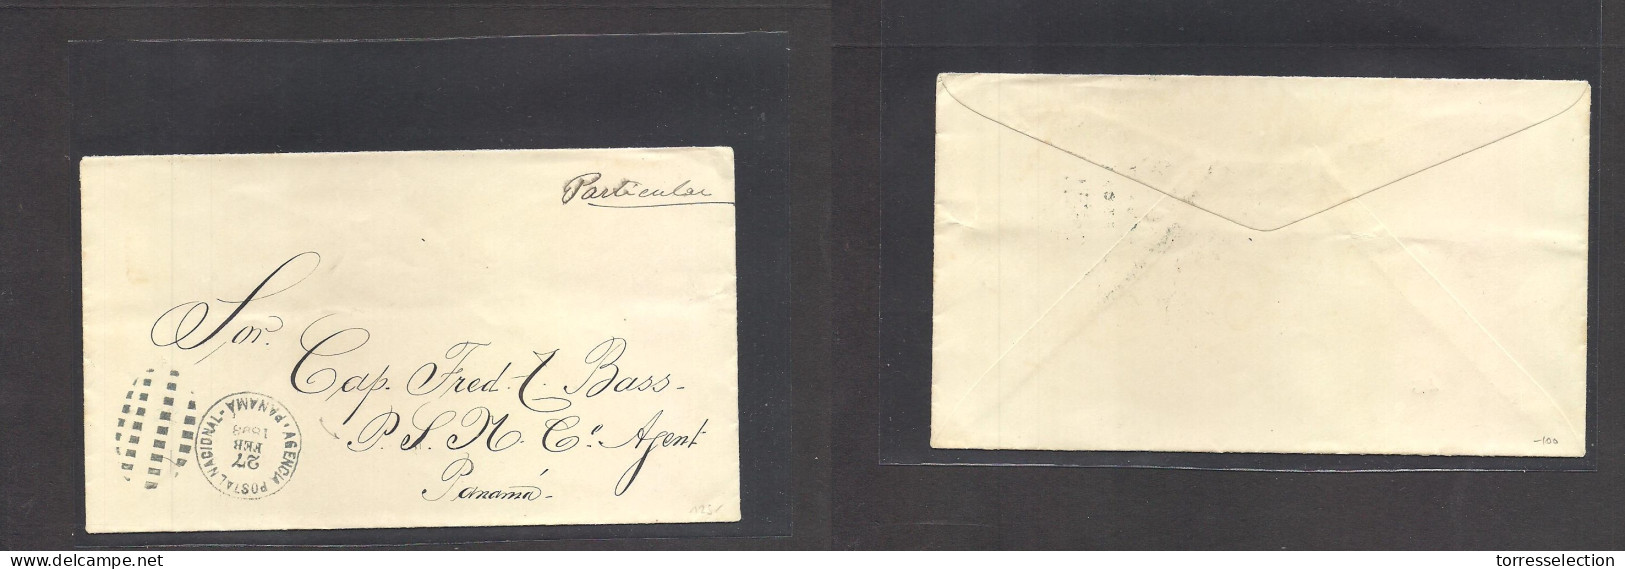 PANAMA. 1893 (27 Febr) GPO. Local Postal Circulated Multifkd Envelope To Captain. Fred Bass Of The "PSNºCº Agent" Intere - Panamá